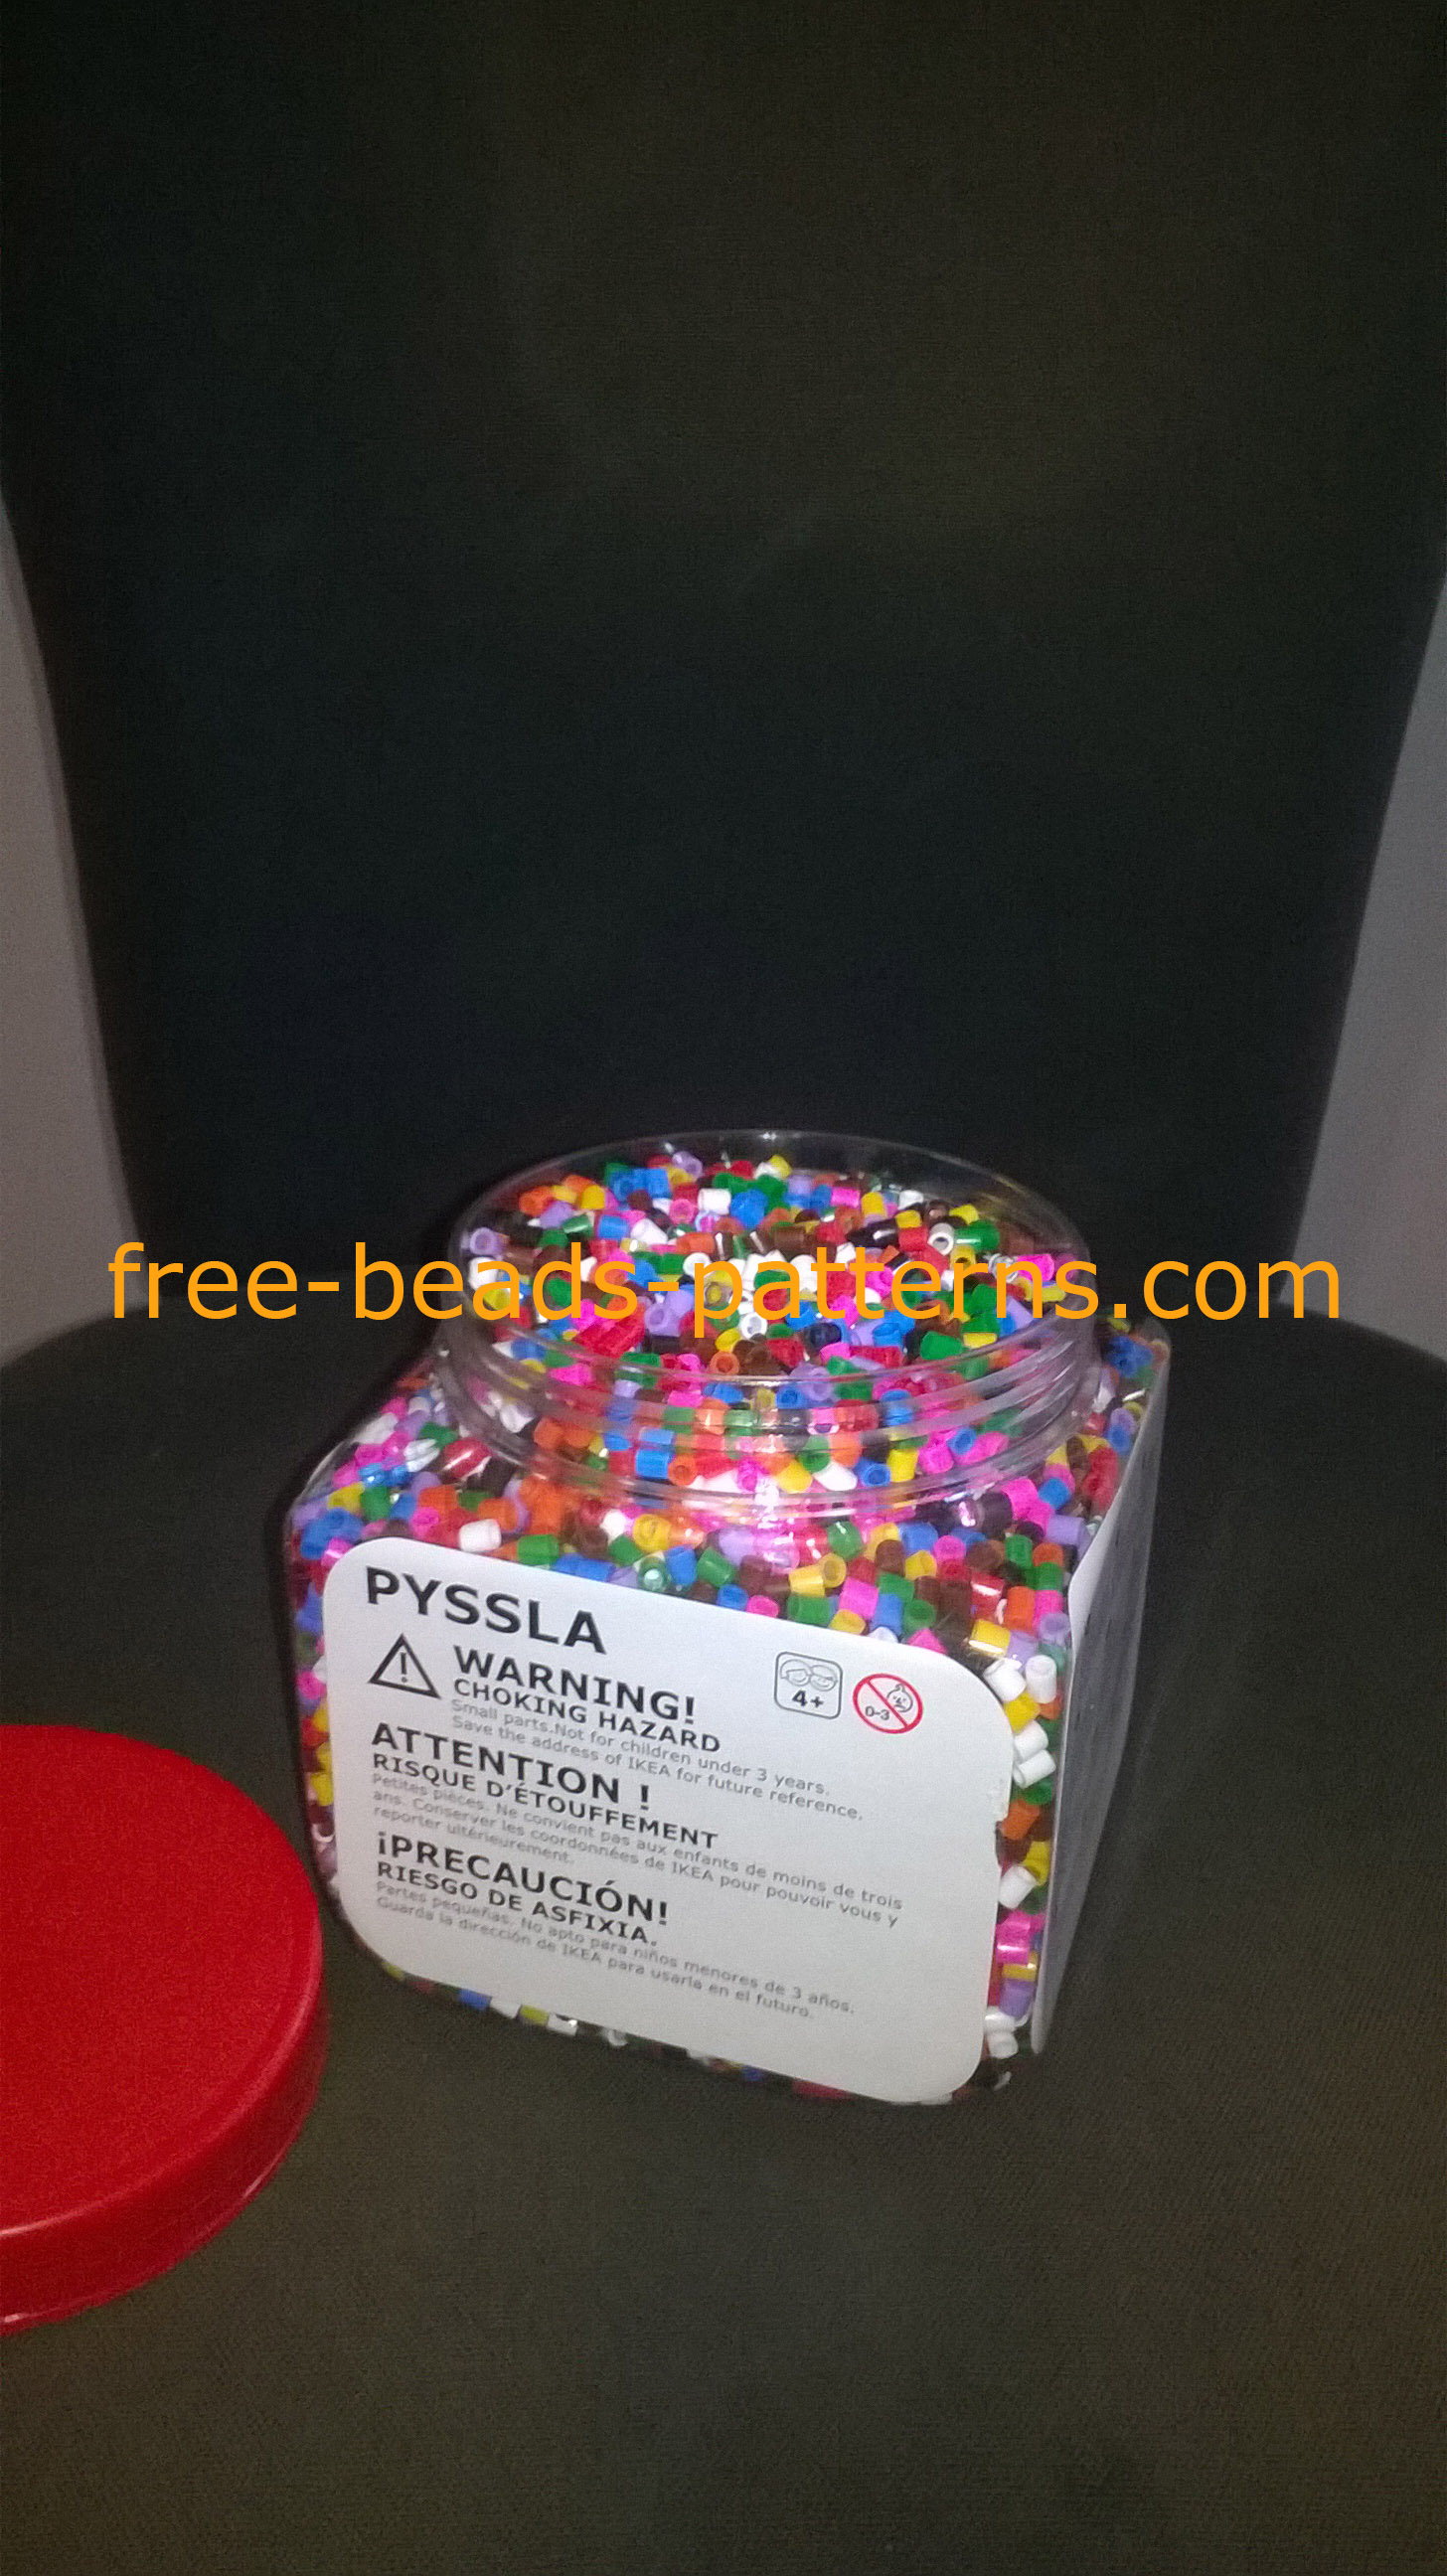 Ikea Pyssla beads for children over 4 years old 5 mm perler beads photos (2)